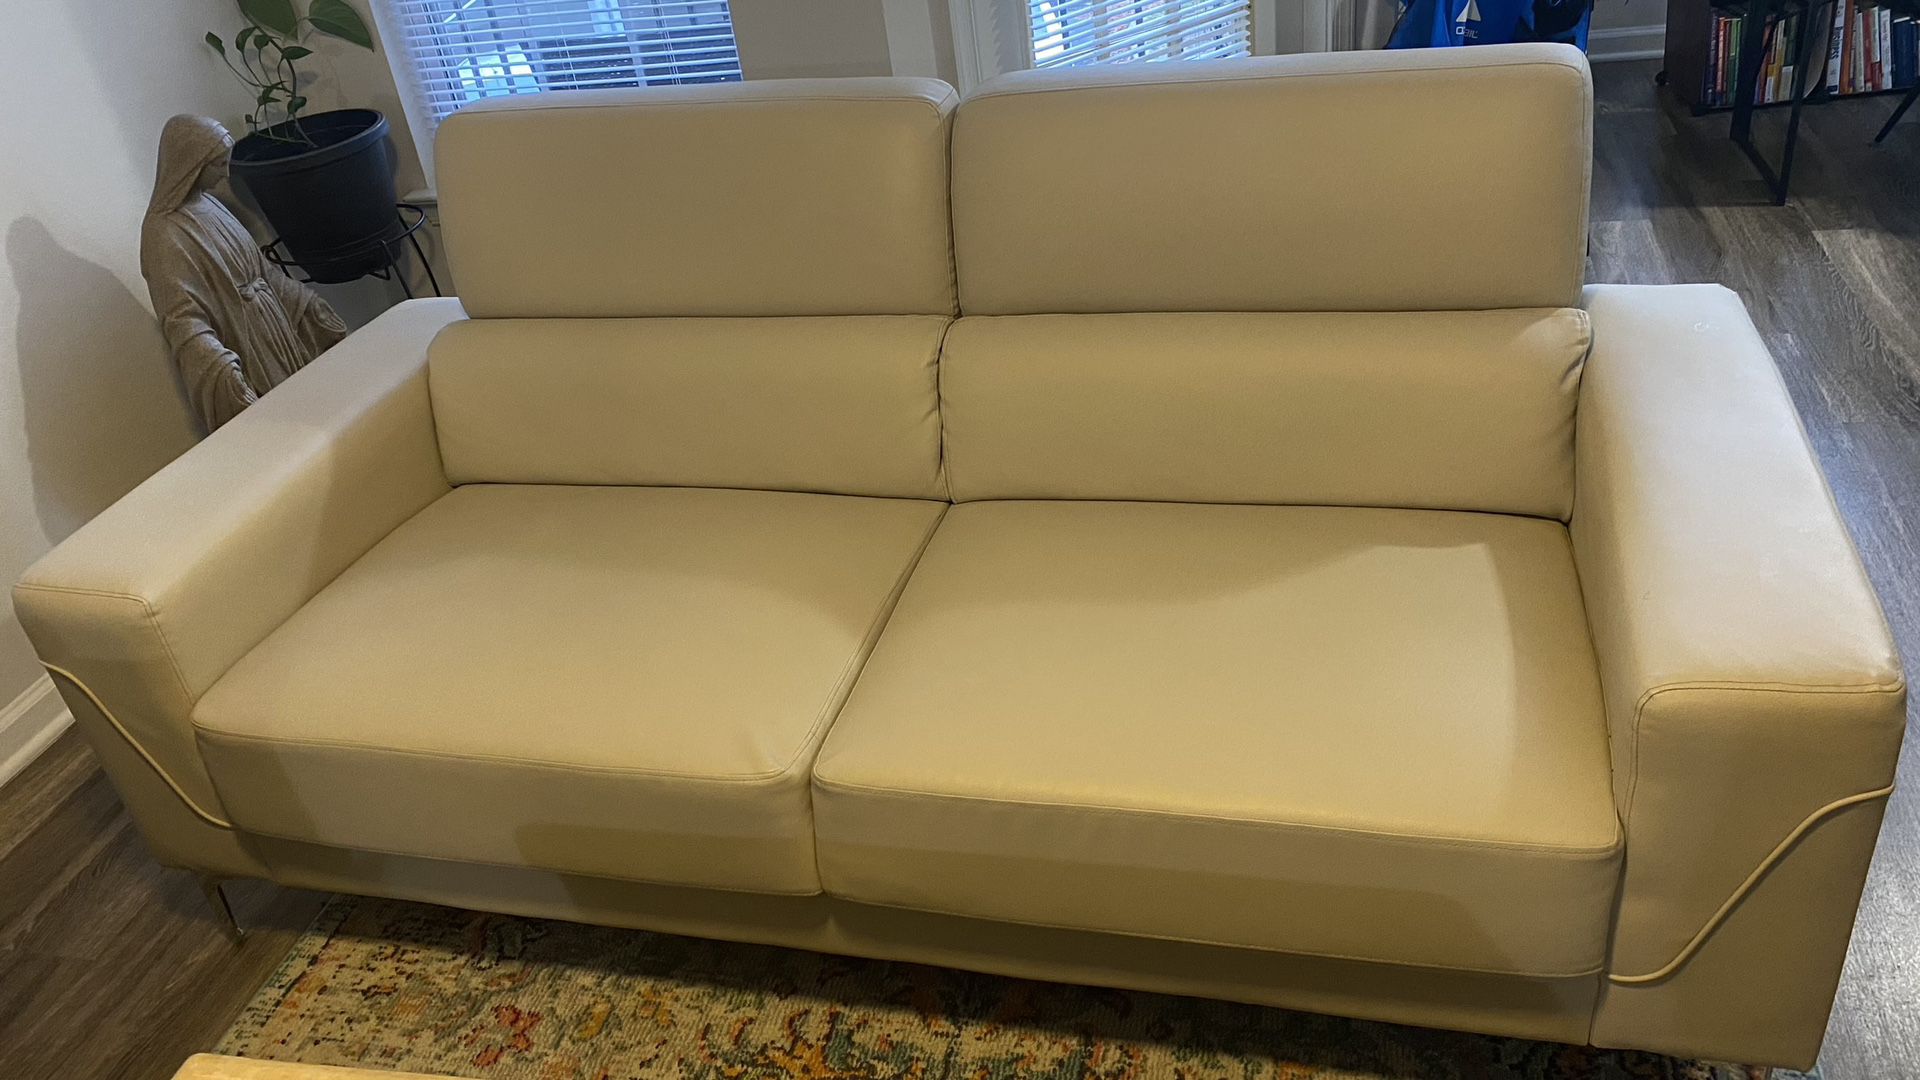 Beige Colored Leather Couch/ Loveseat Leather Couch/ Leather Couch 